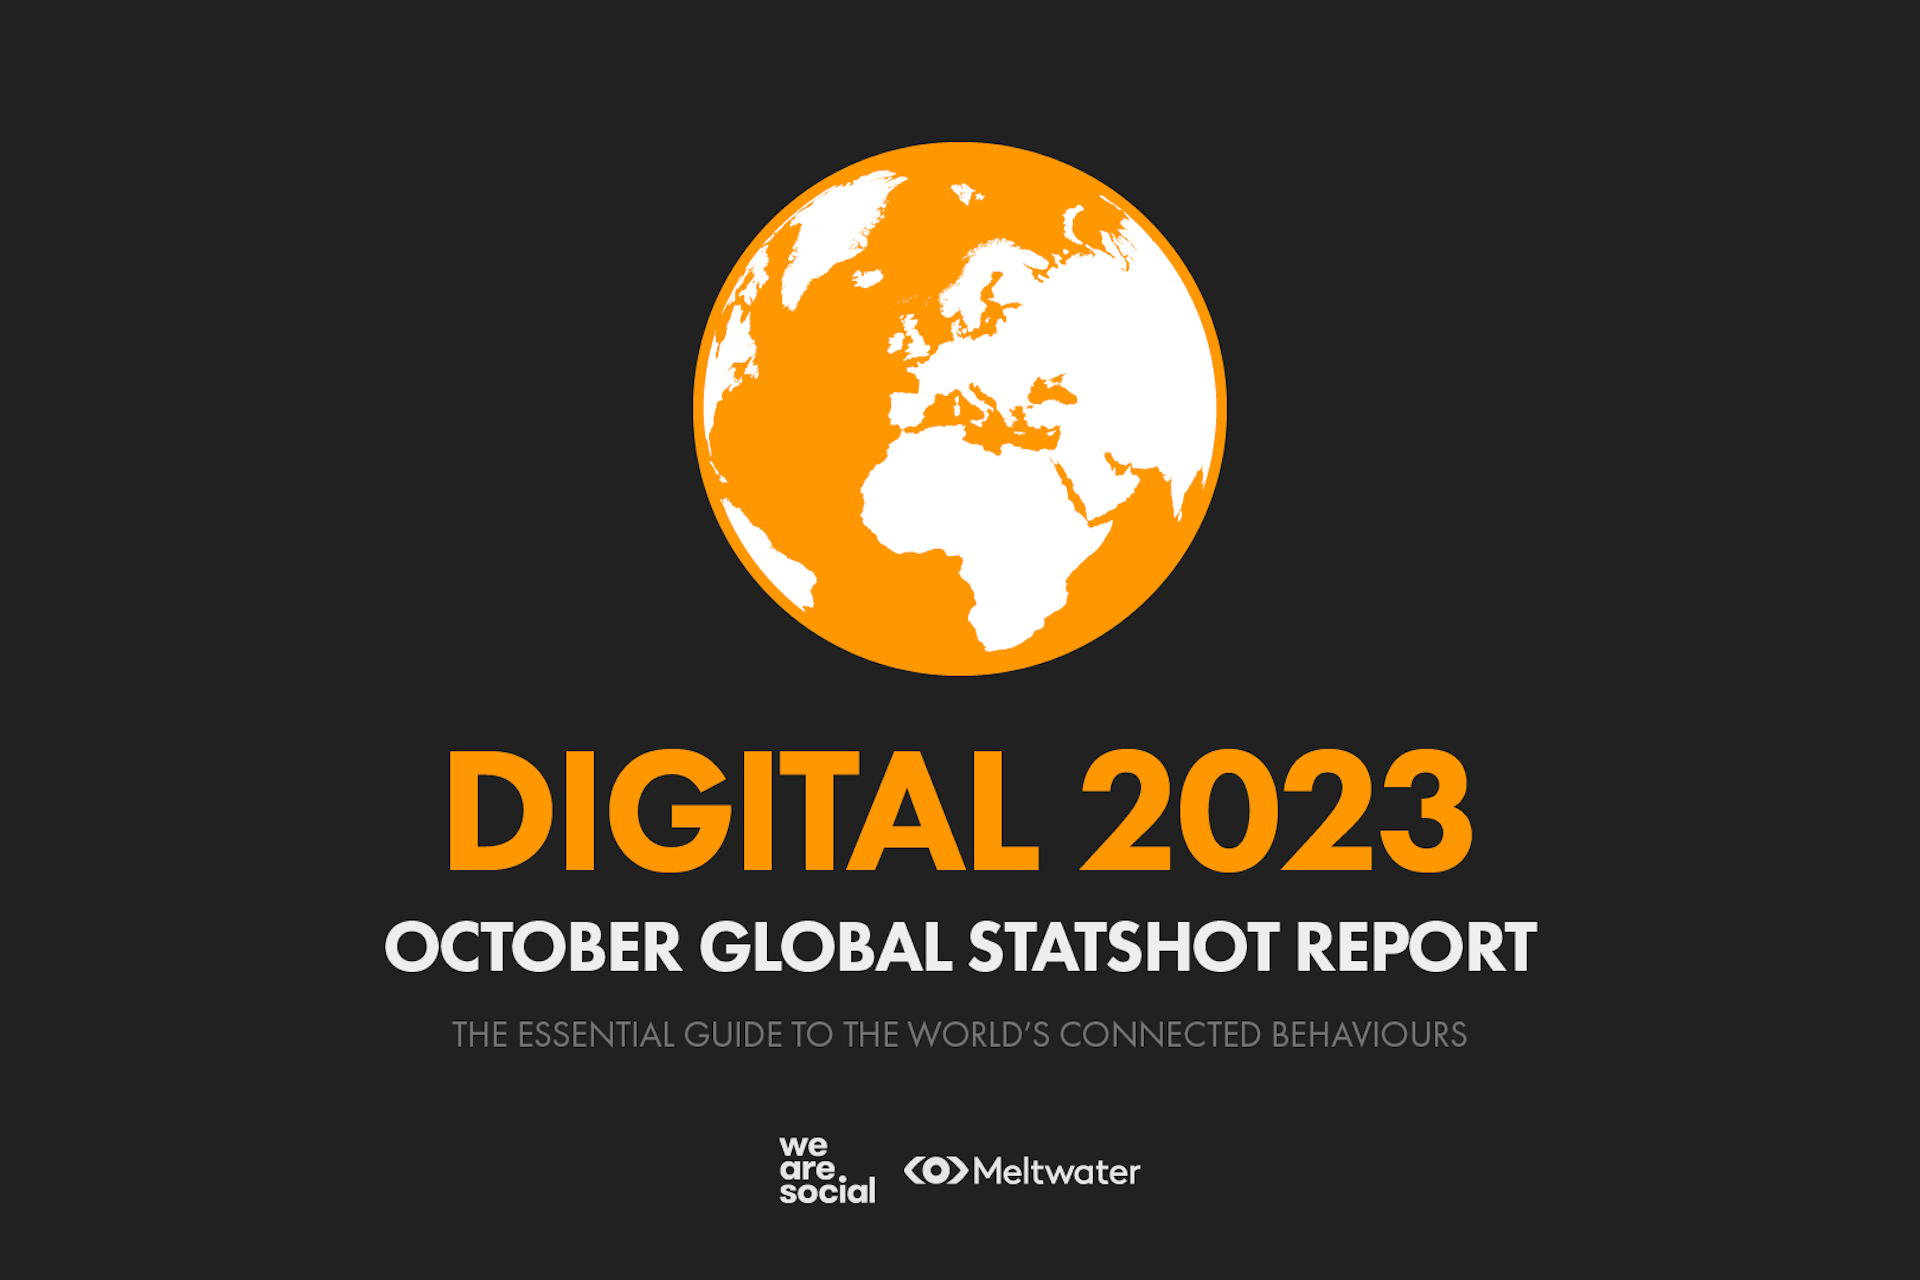 An orange globe over the words "Digital 2023: October Global Statshot Report, the Essential Guide to the World's Connected Behaviors."